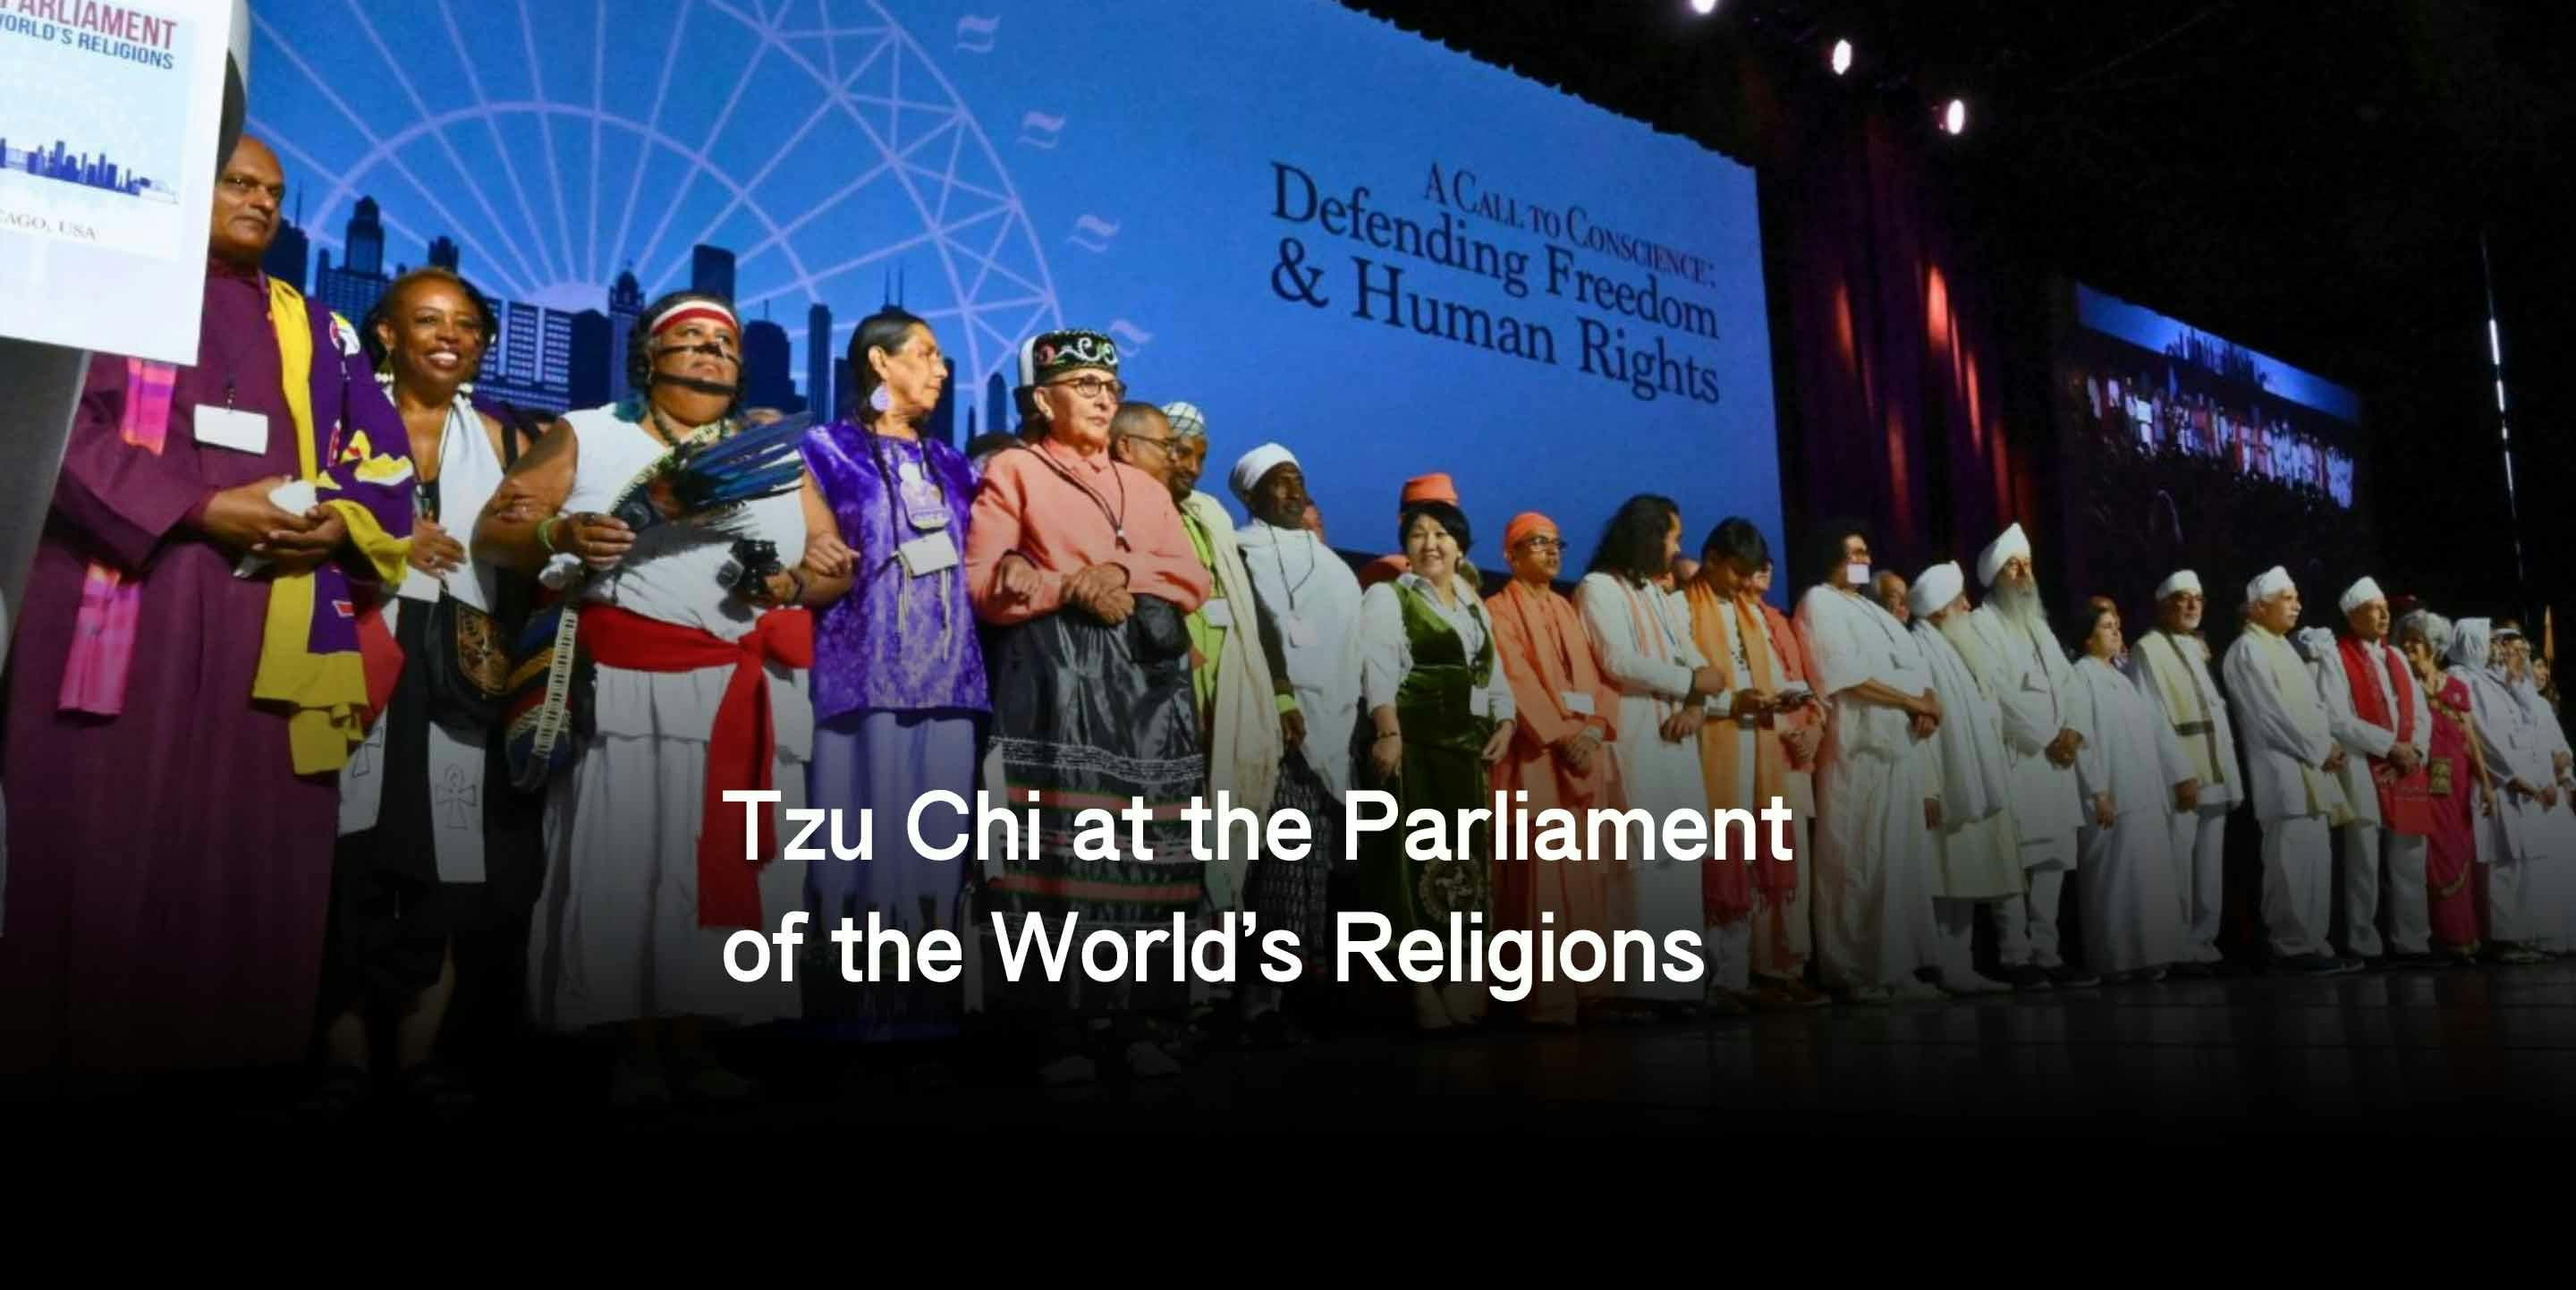 Tzu Chi Calls for Peace and Moral Conscience at Parliament of the World's Religions in Chicago